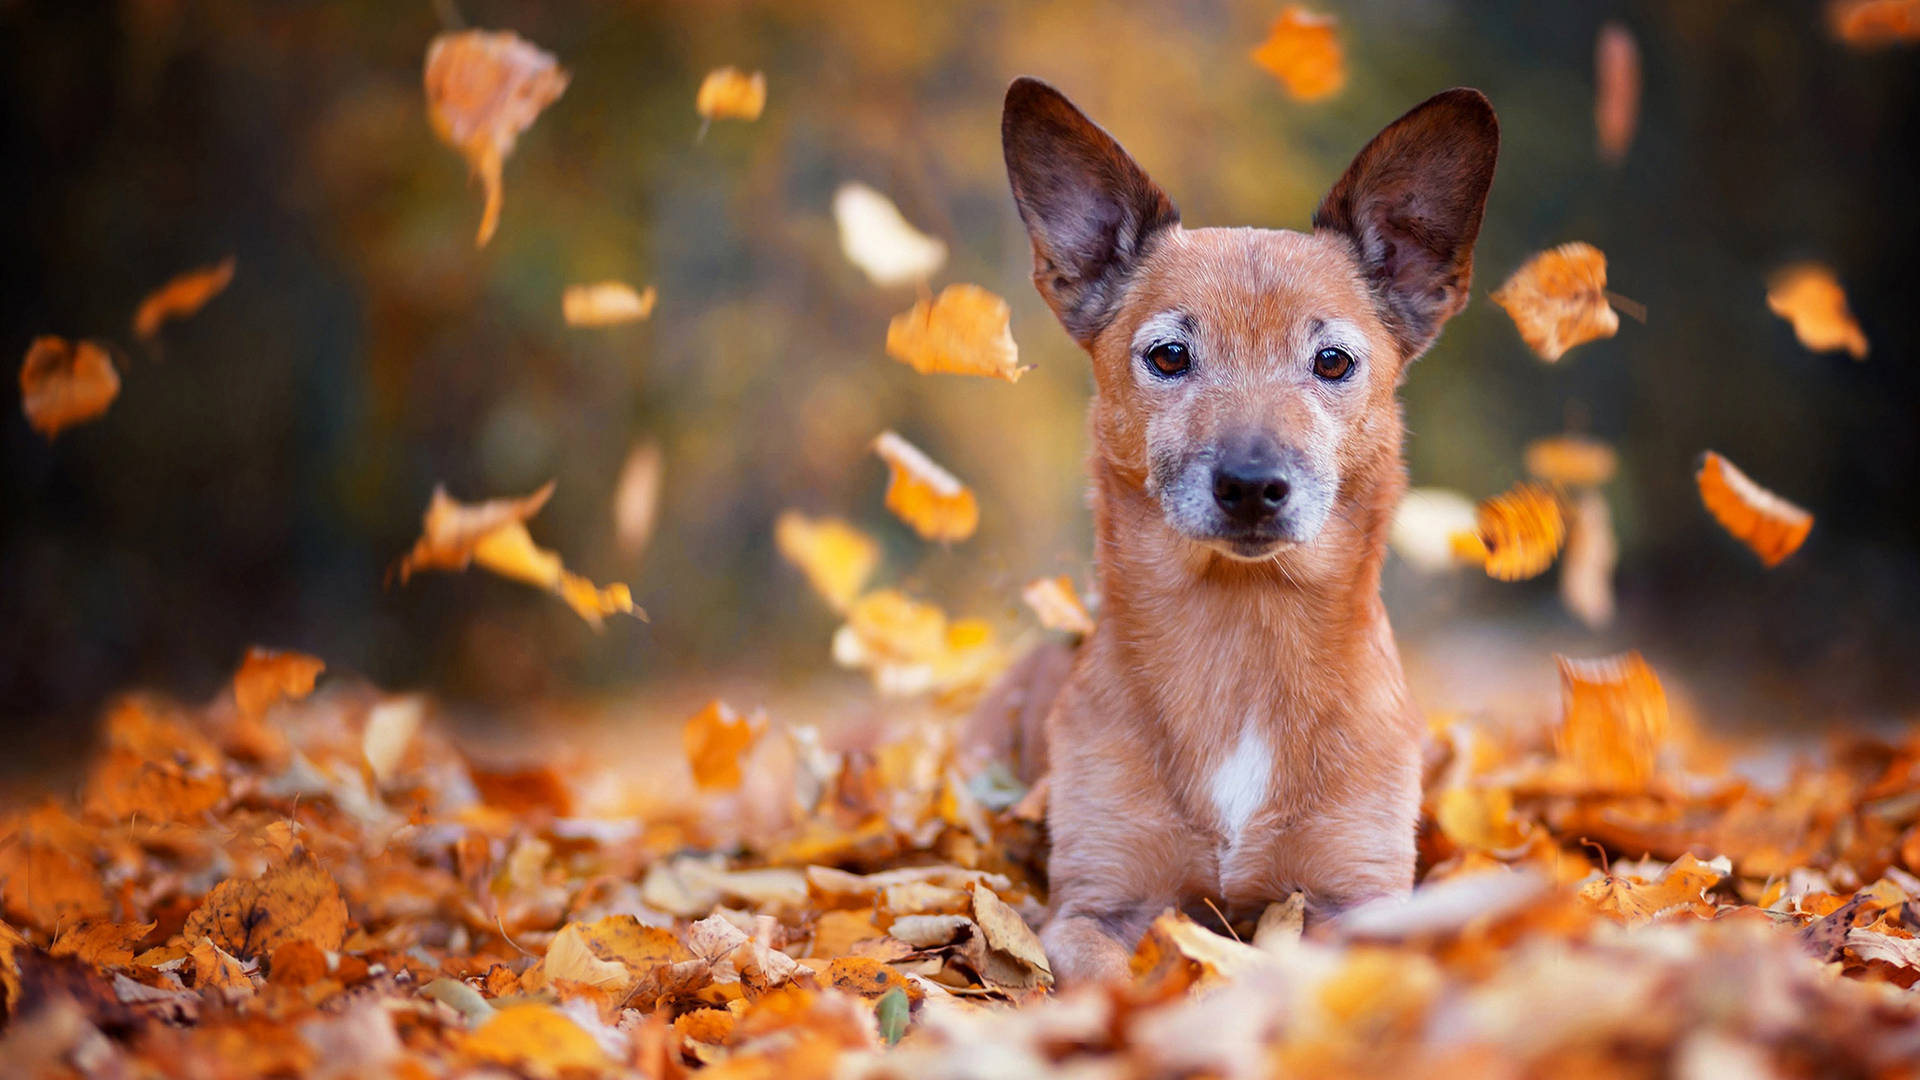 Cute Red Dog On Autumn Leaves Wallpaper